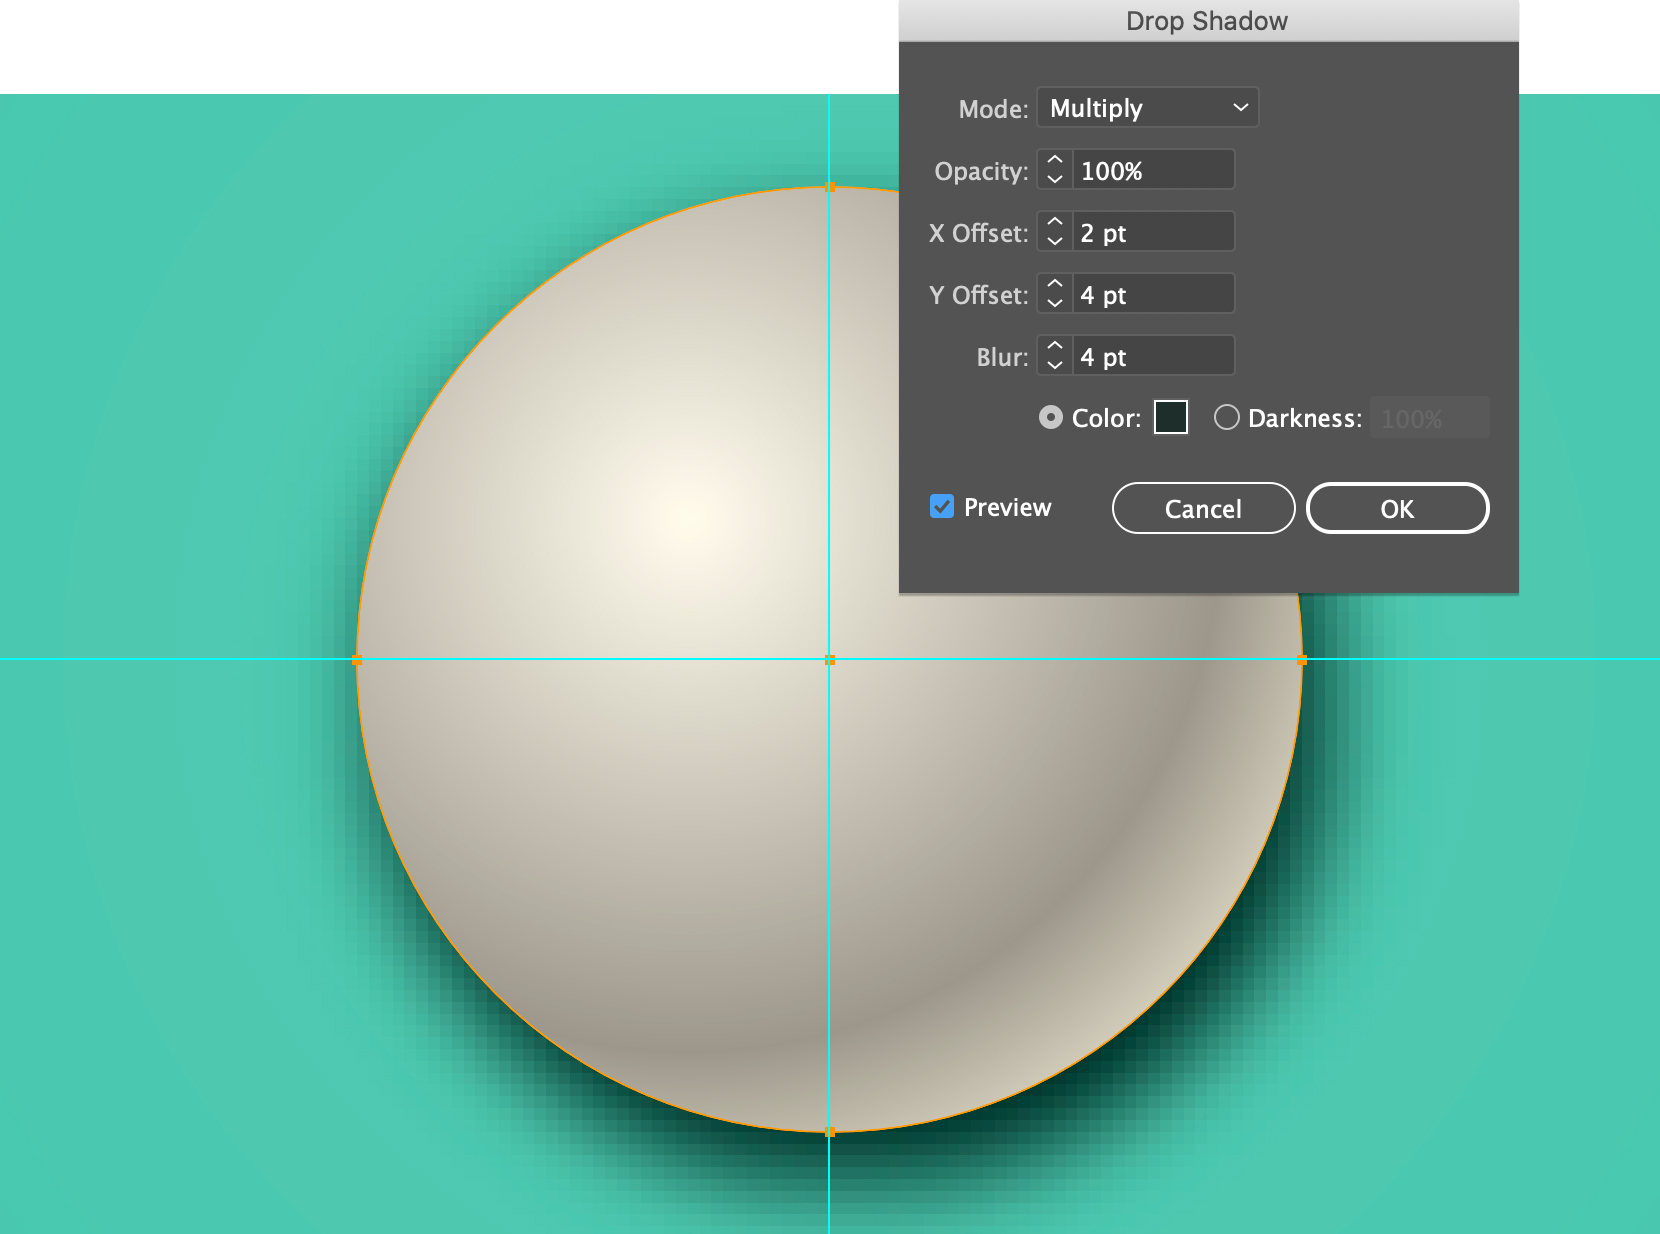 A cueball with a drop shadow in Adobe Illustrator